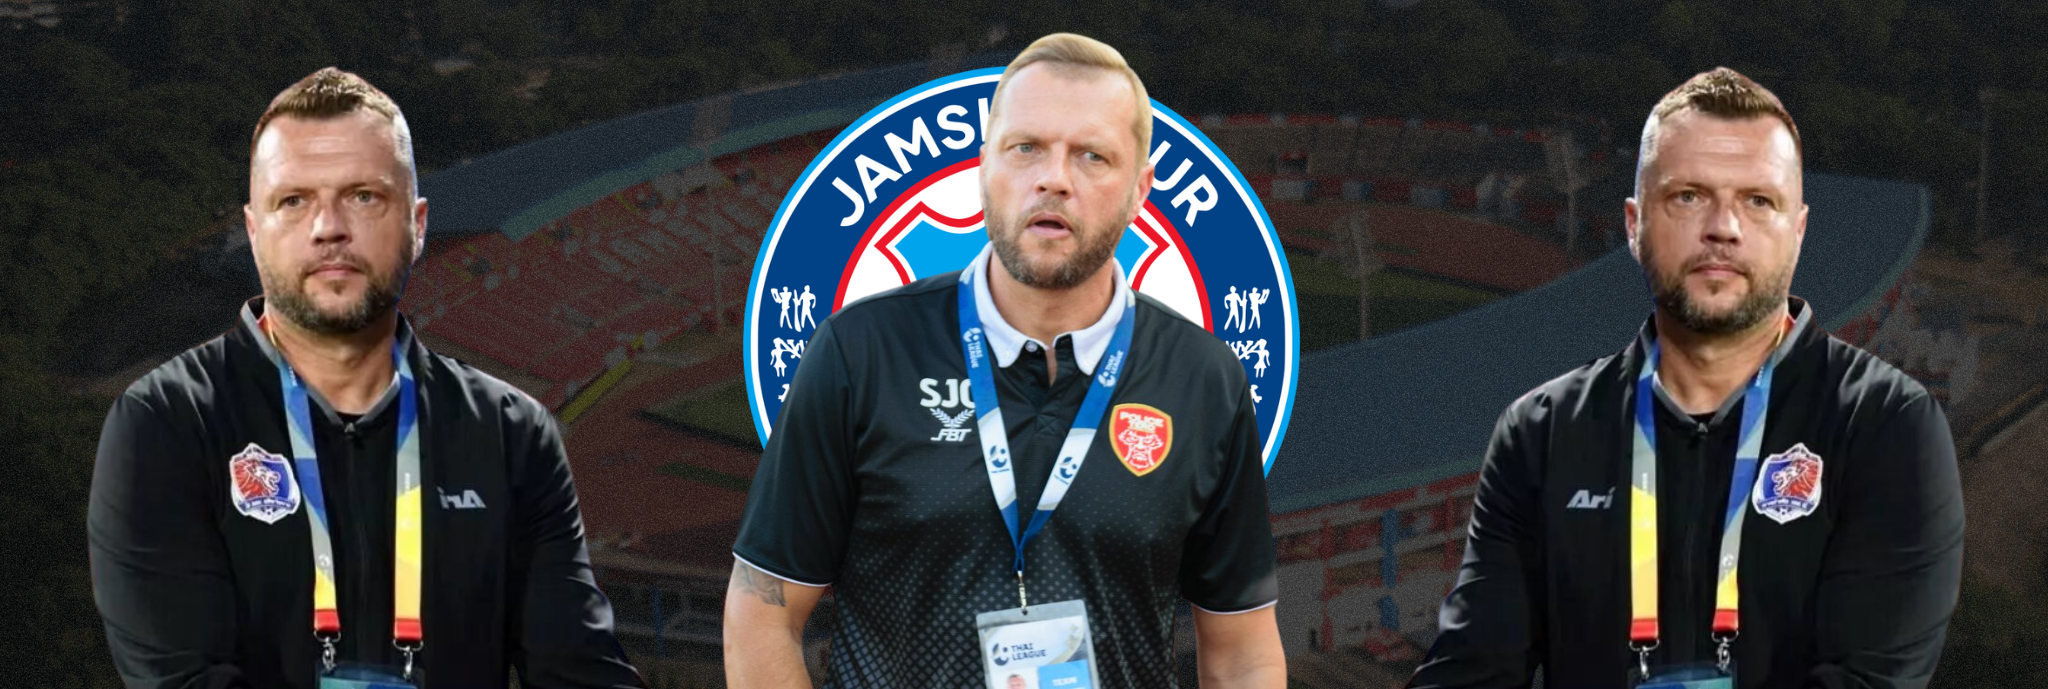 Jamshedpur FC welcomes Scott Cooper as their new head coach